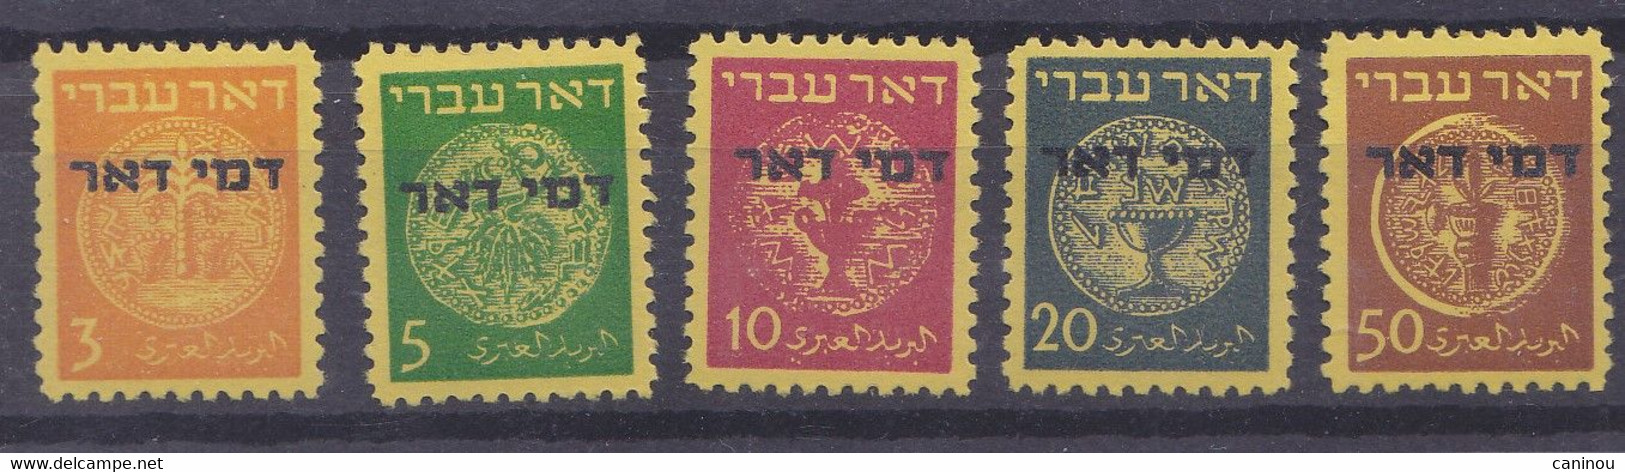 ISRAEL TIMBRES TAXE 1948 Y & T 1-5 MONNAIES ANCIENNES NEUFS TRACES CHARNIERES - Segnatasse